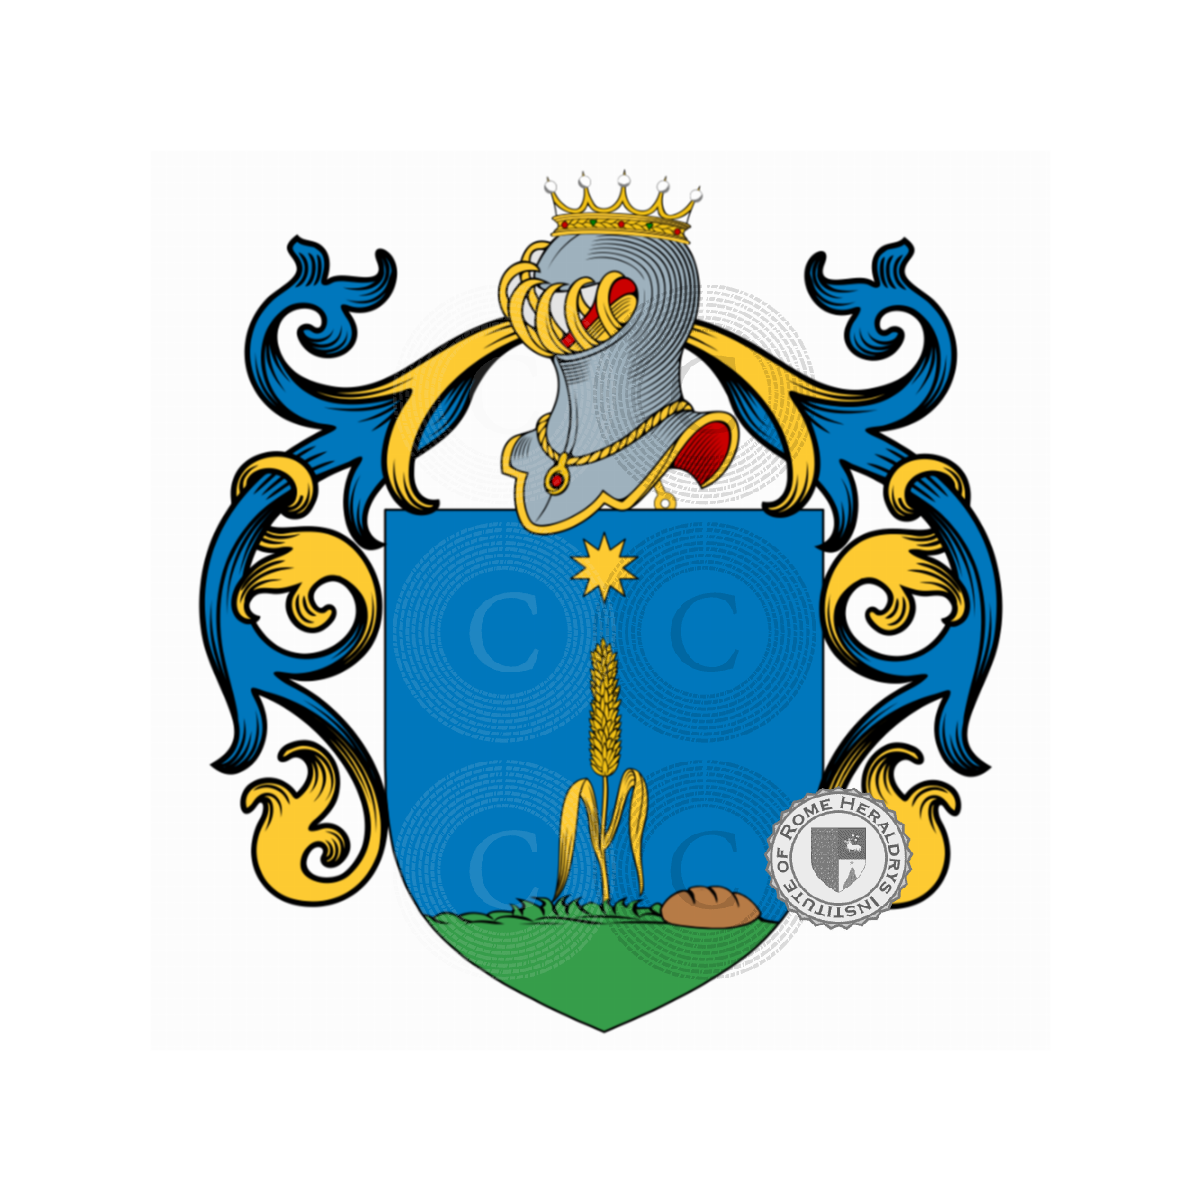 Coat of arms of familyPais